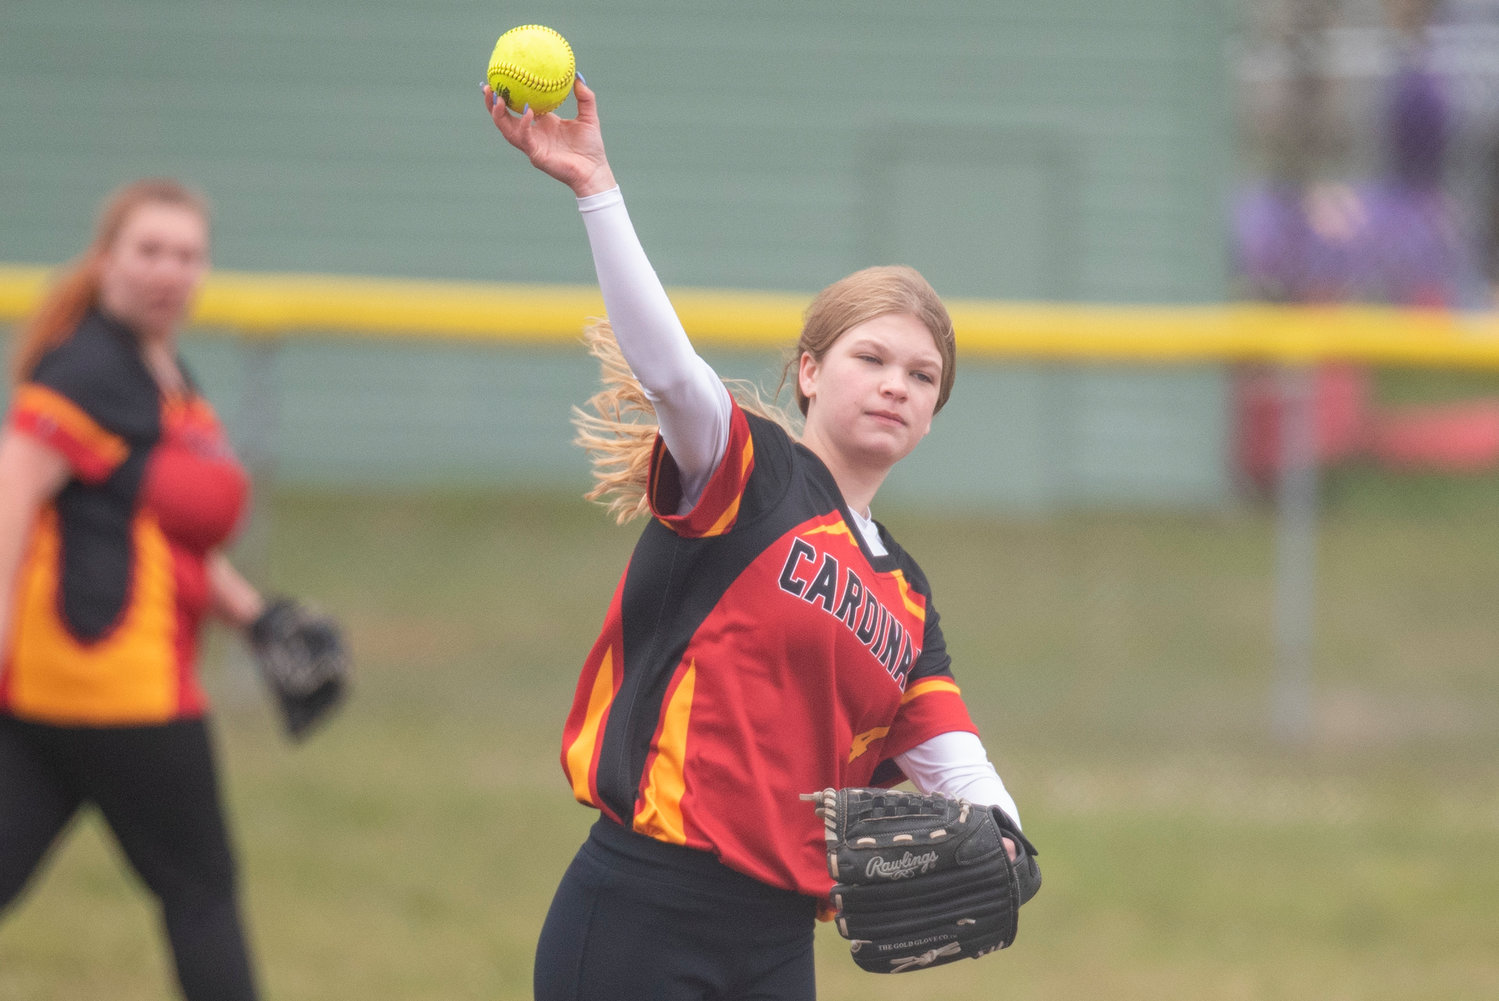 Winlock shortstop Kindyl Kelly tosses a ball back to the pitcher during a home game against Adna on April 20.